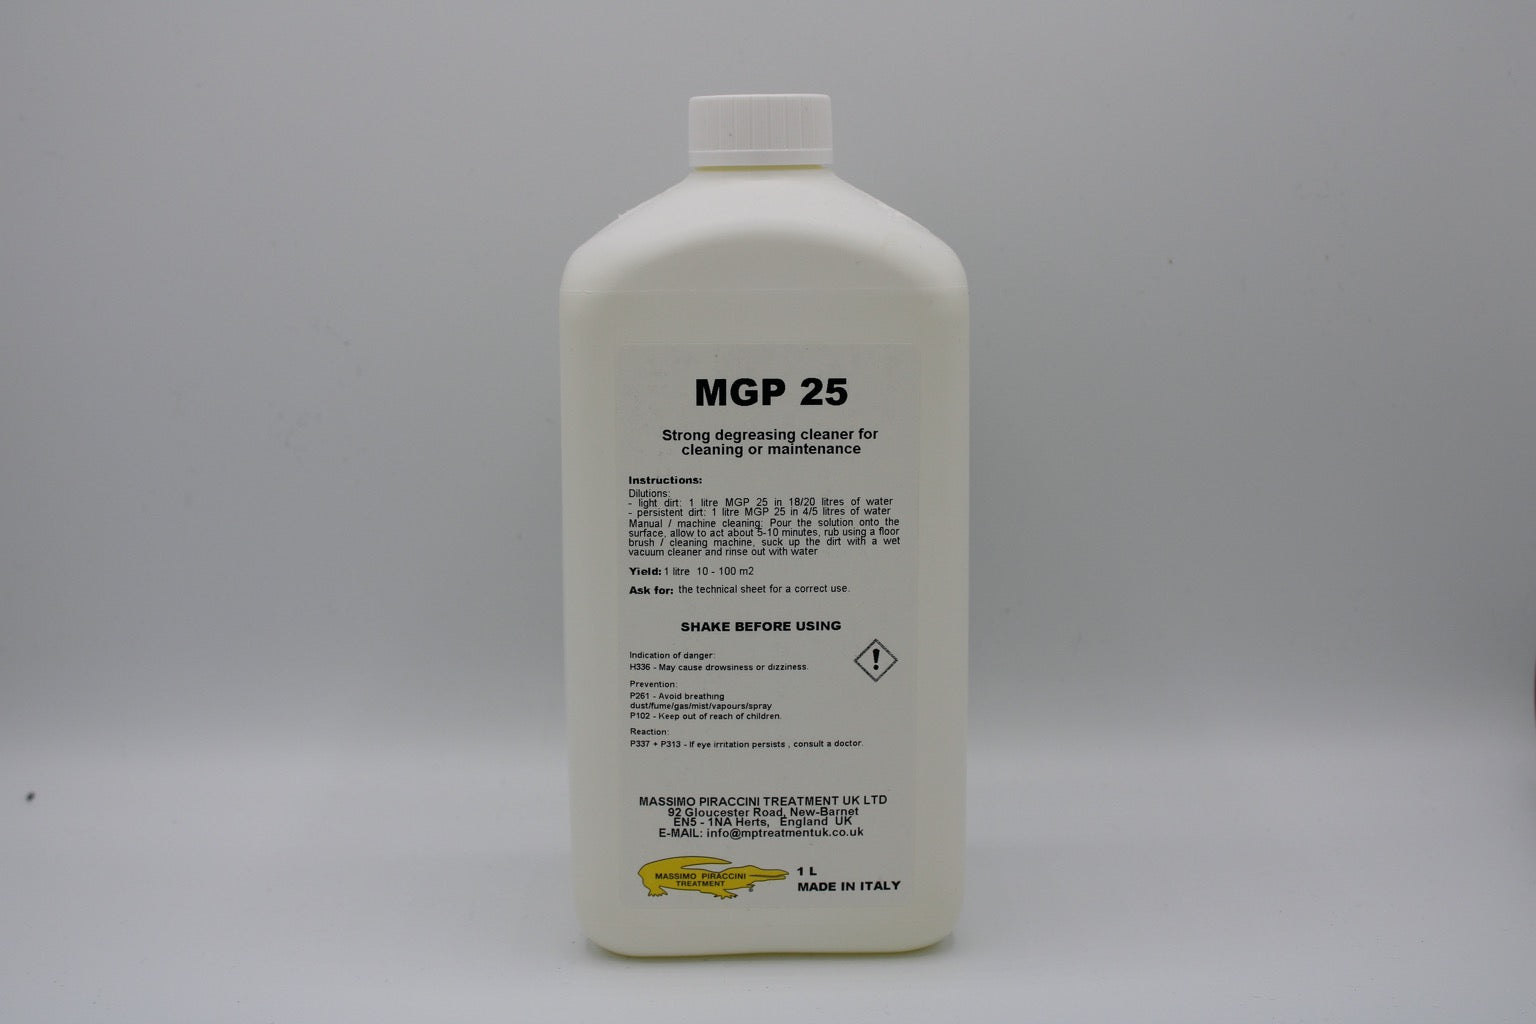 MGP 25 - Degreasing cleaner for ordinary or maintenance cleaning. SOLVENT AND ACID FREE